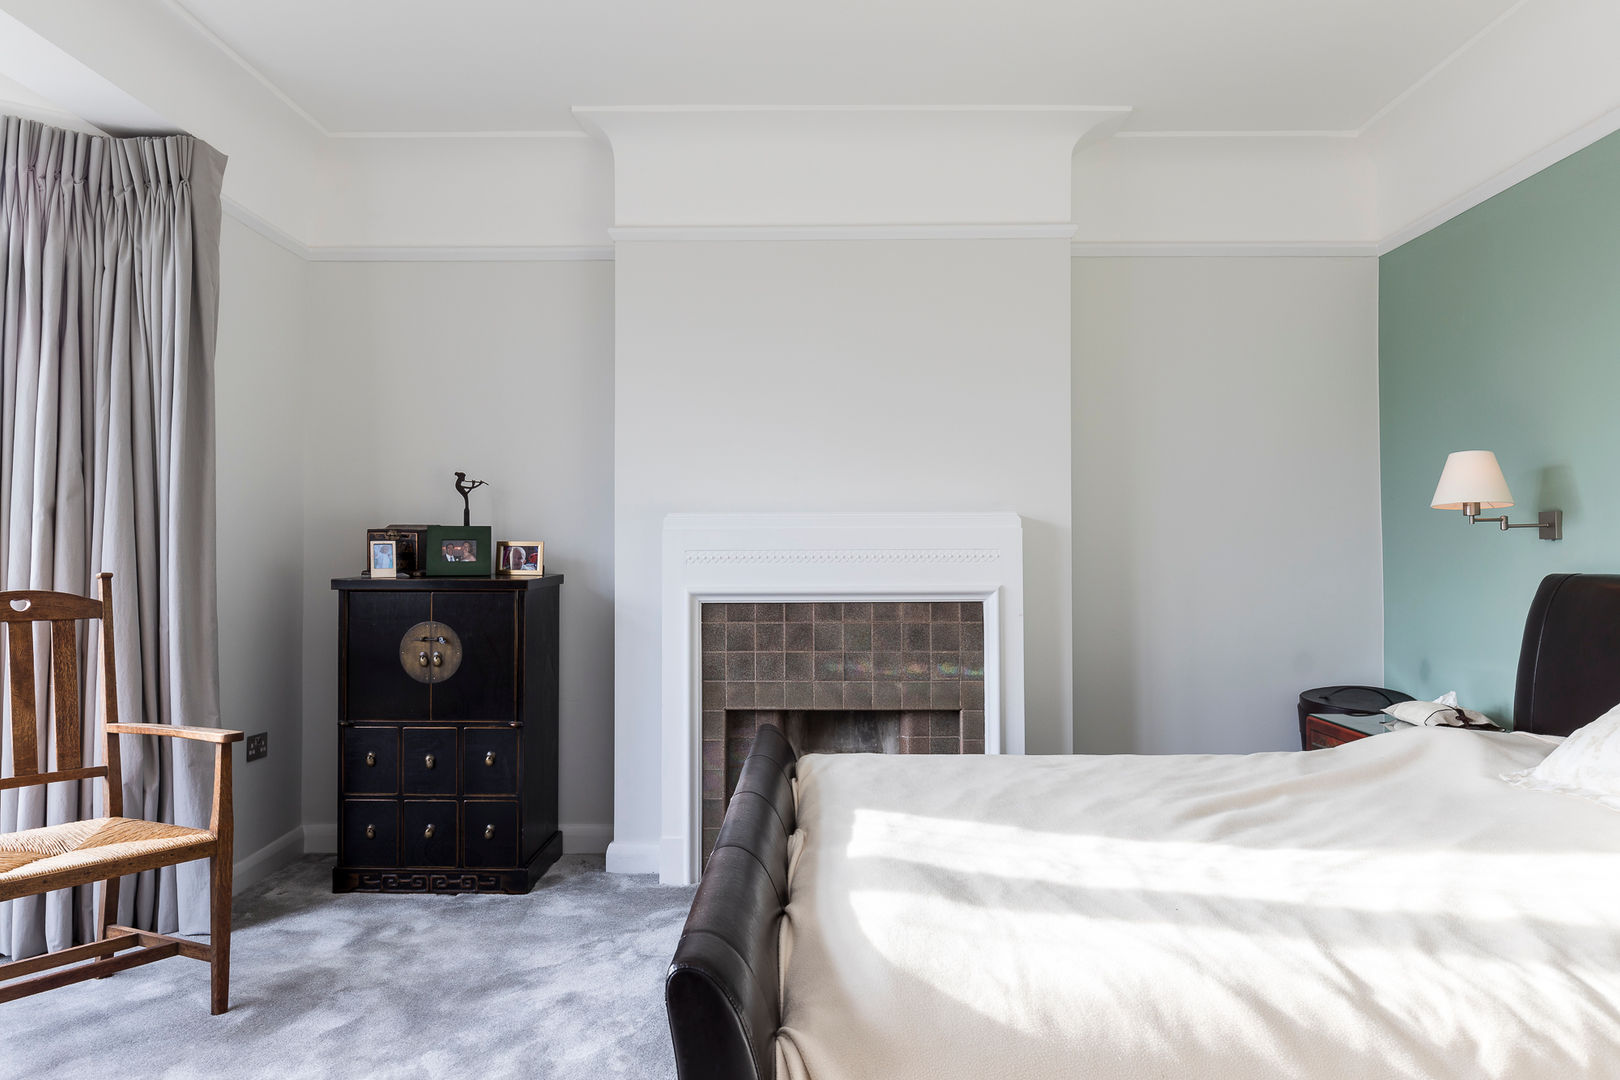 Vicarage Rd London SW14, VCDesign Architectural Services VCDesign Architectural Services Modern style bedroom